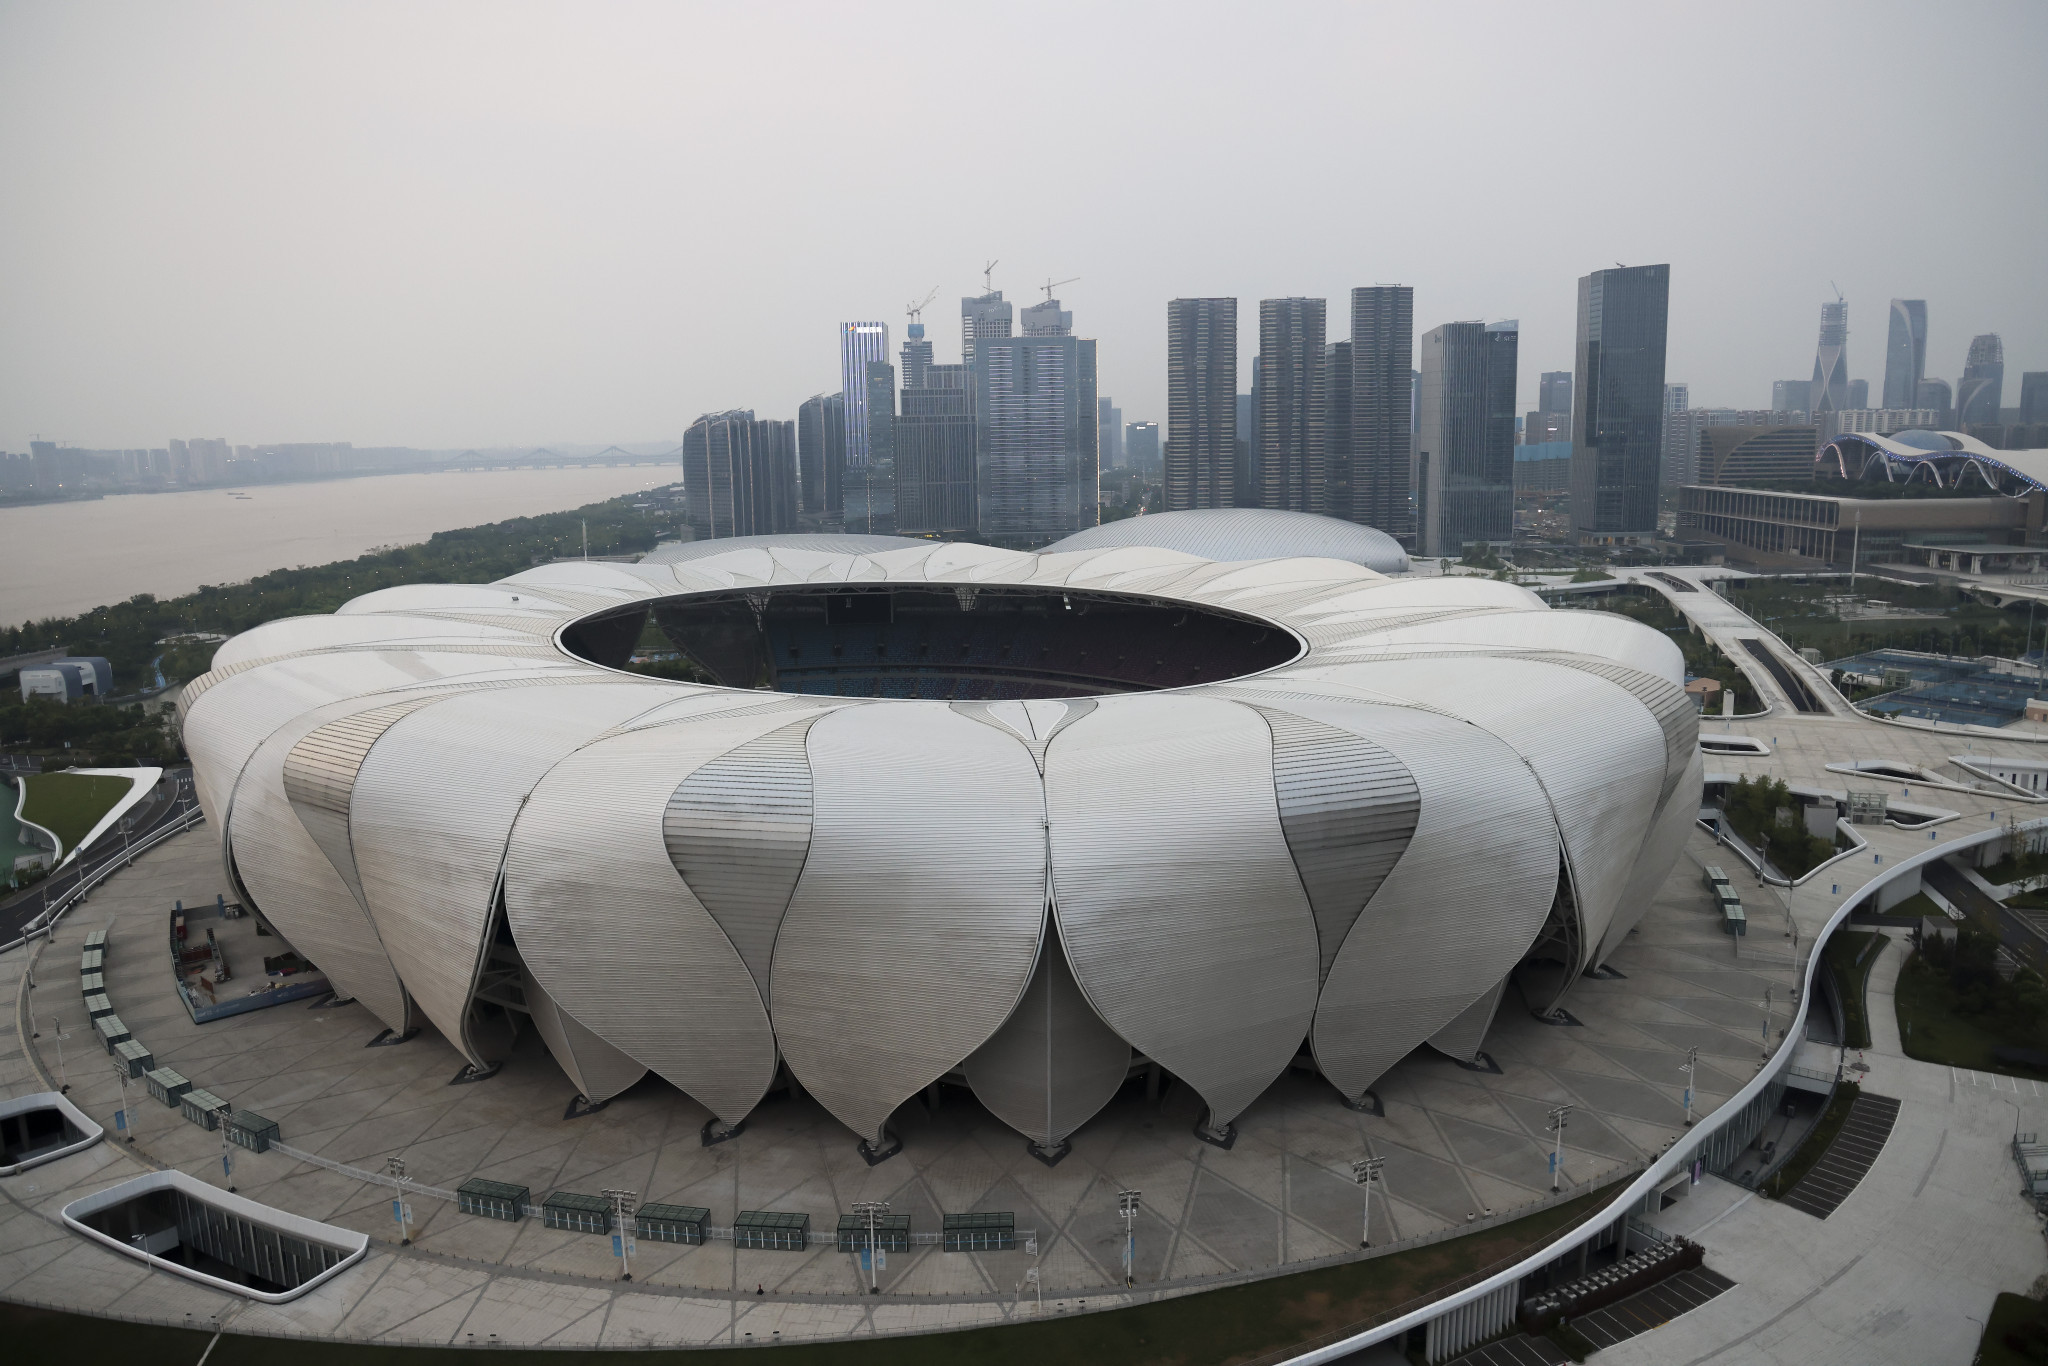 Hangzhou 2022 conducts pre-delegation registration meetings with Asian Games nations